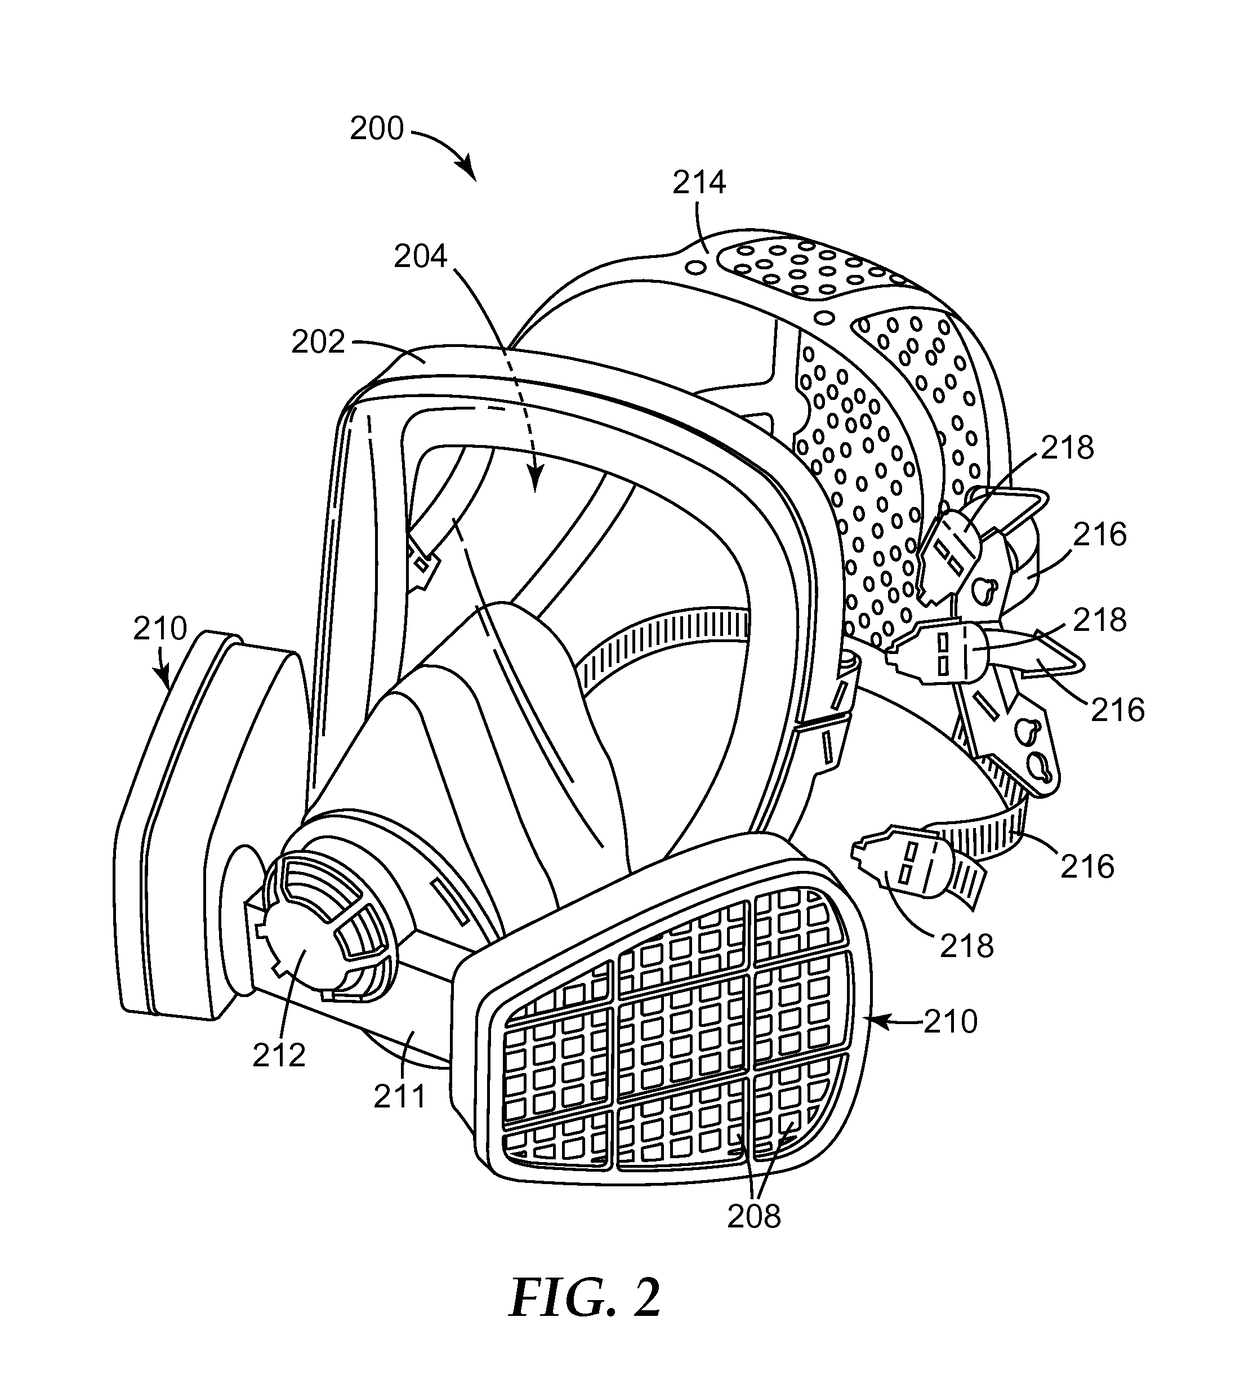 Layered or mixed sorbent bed protective filtration device